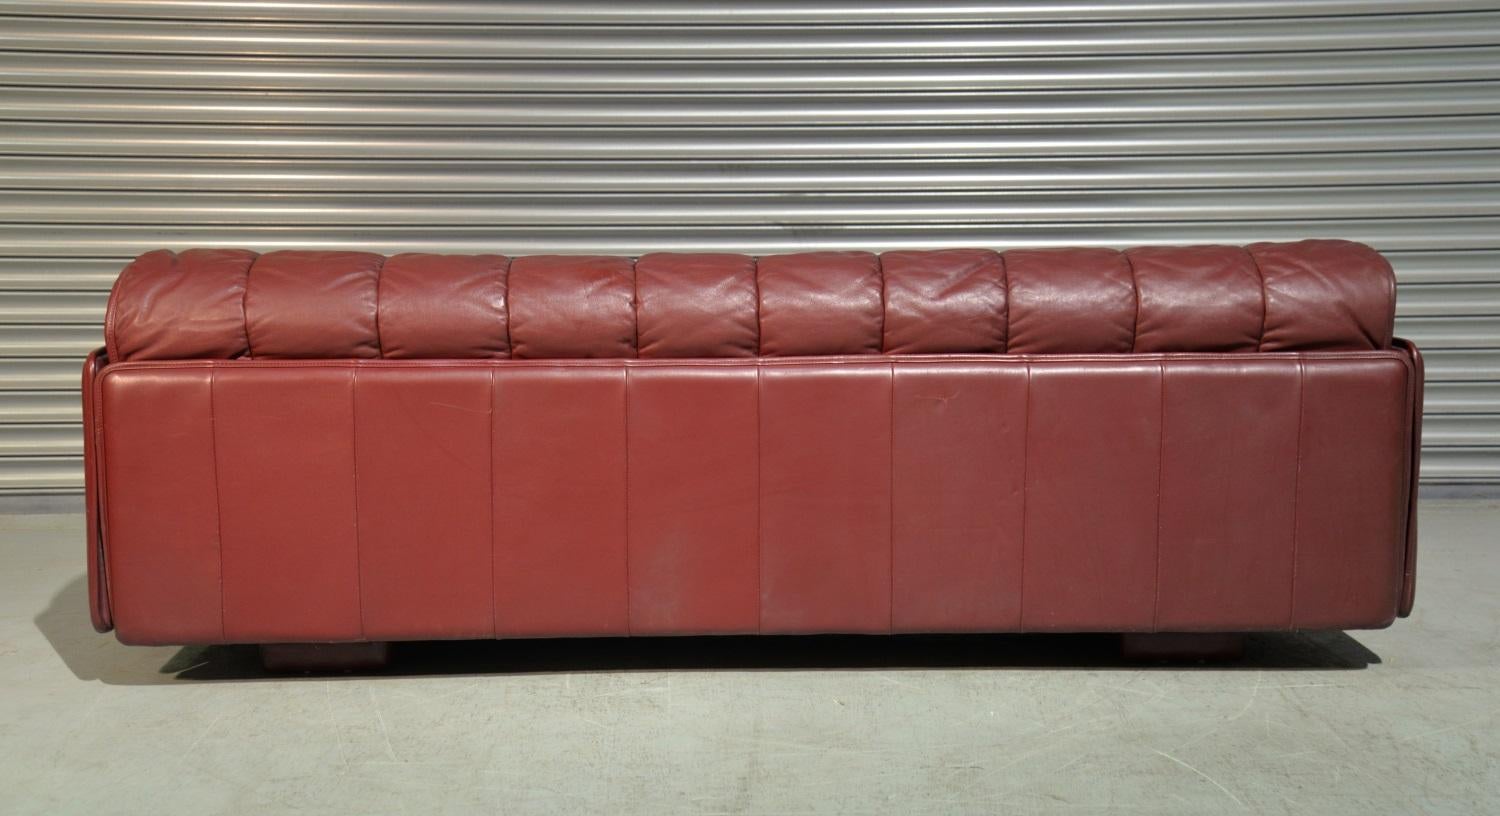 Vintage De Sede Patchwork Leather Sofa or Daybed, Switzerland, 1970s For Sale 1